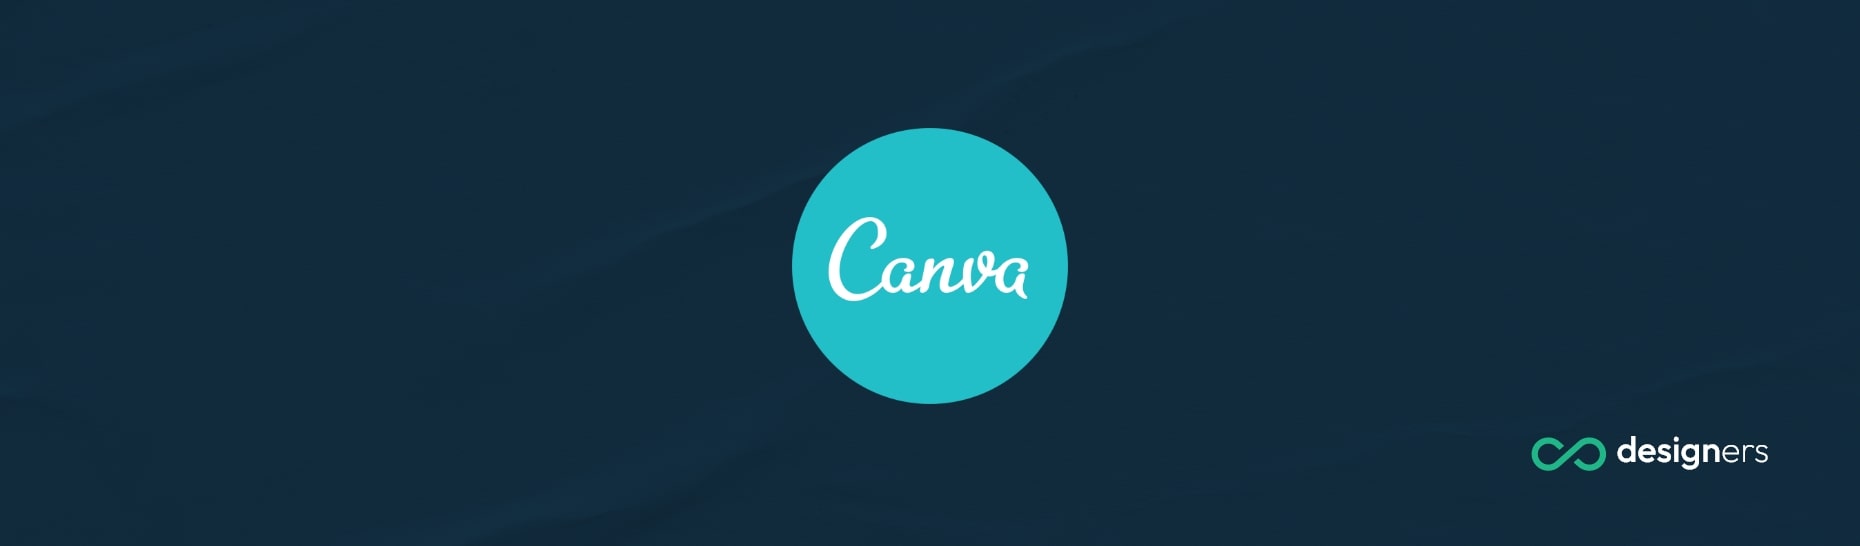 How Do I Make Videos Compatible With Canva?